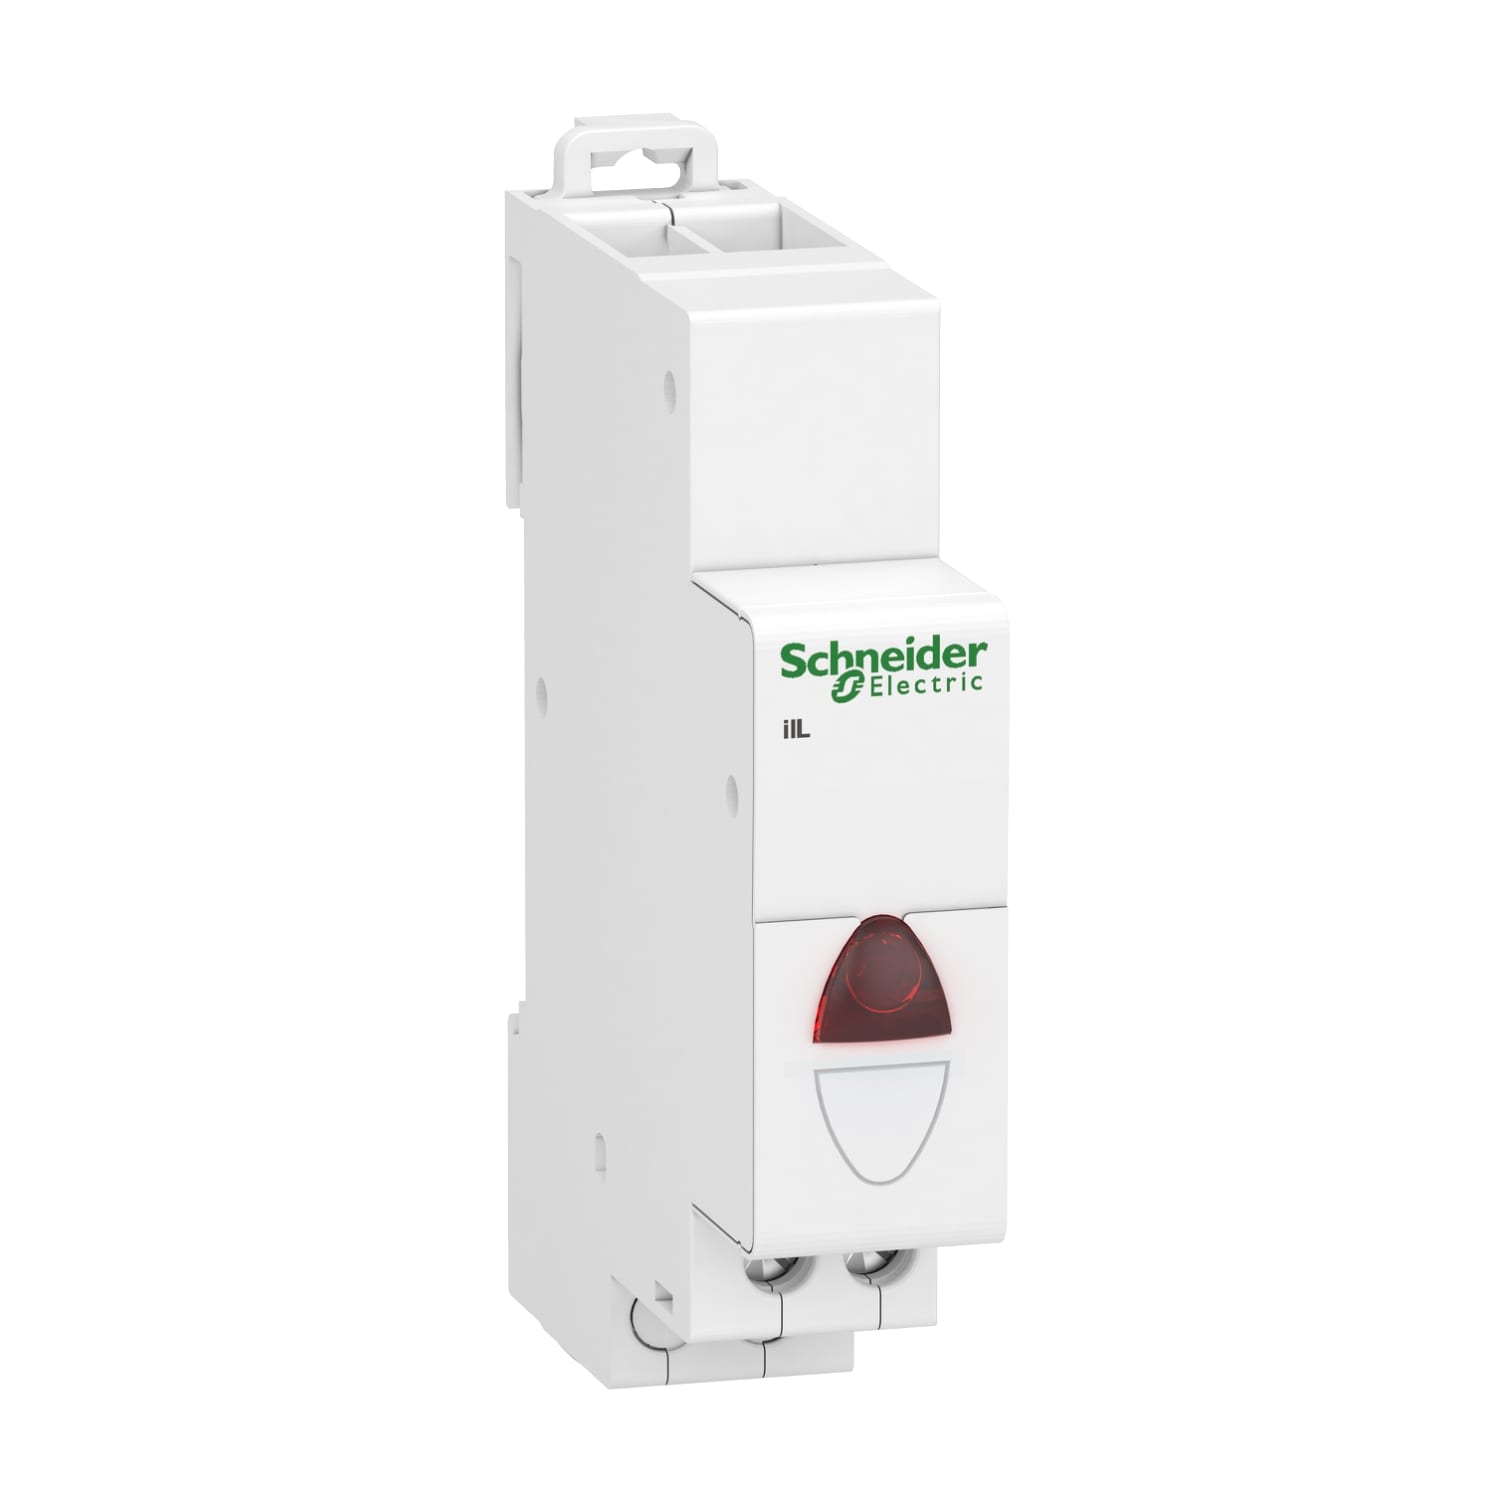 Schneider Electric - Acti9, iIL voyant lumineux simple clignotant rouge 110...230VCA